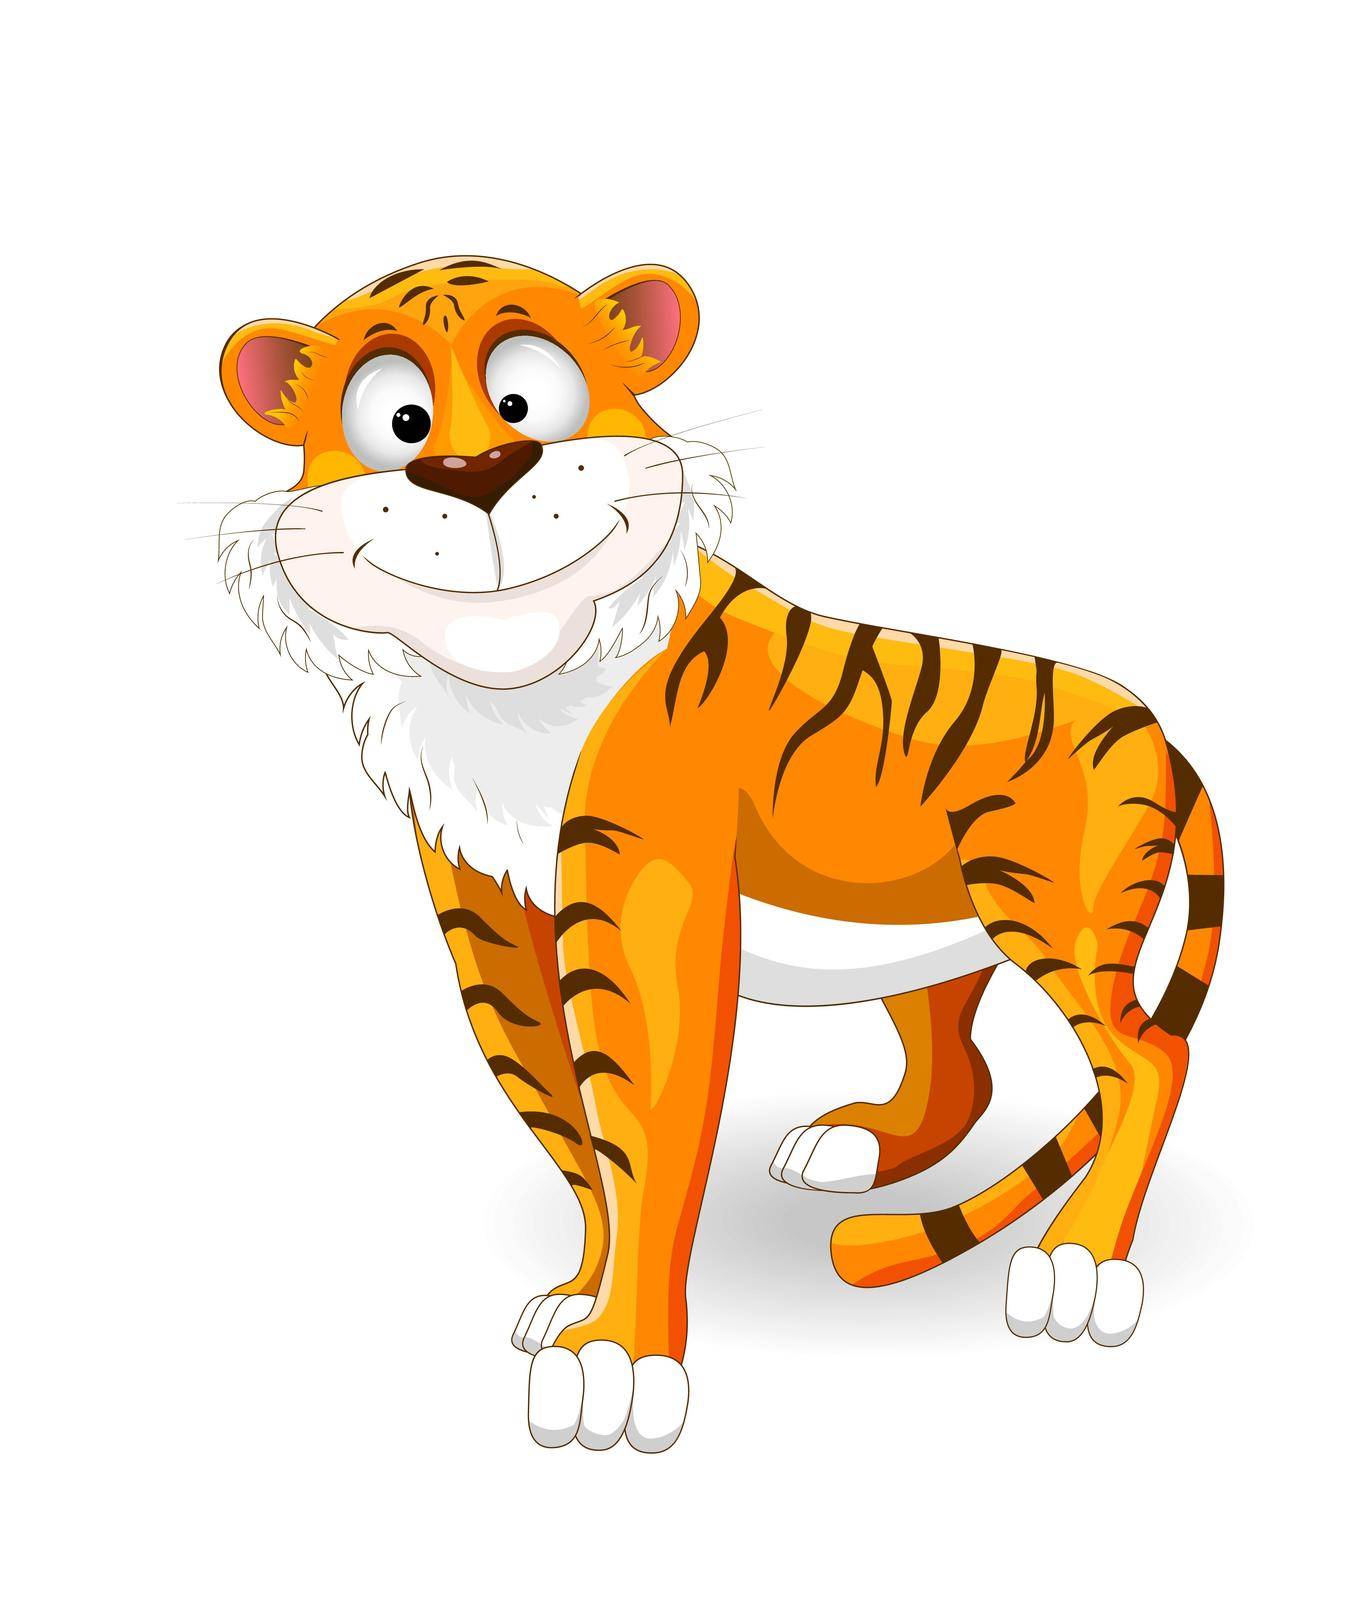 Cartoon smiling tiger on a white background.


